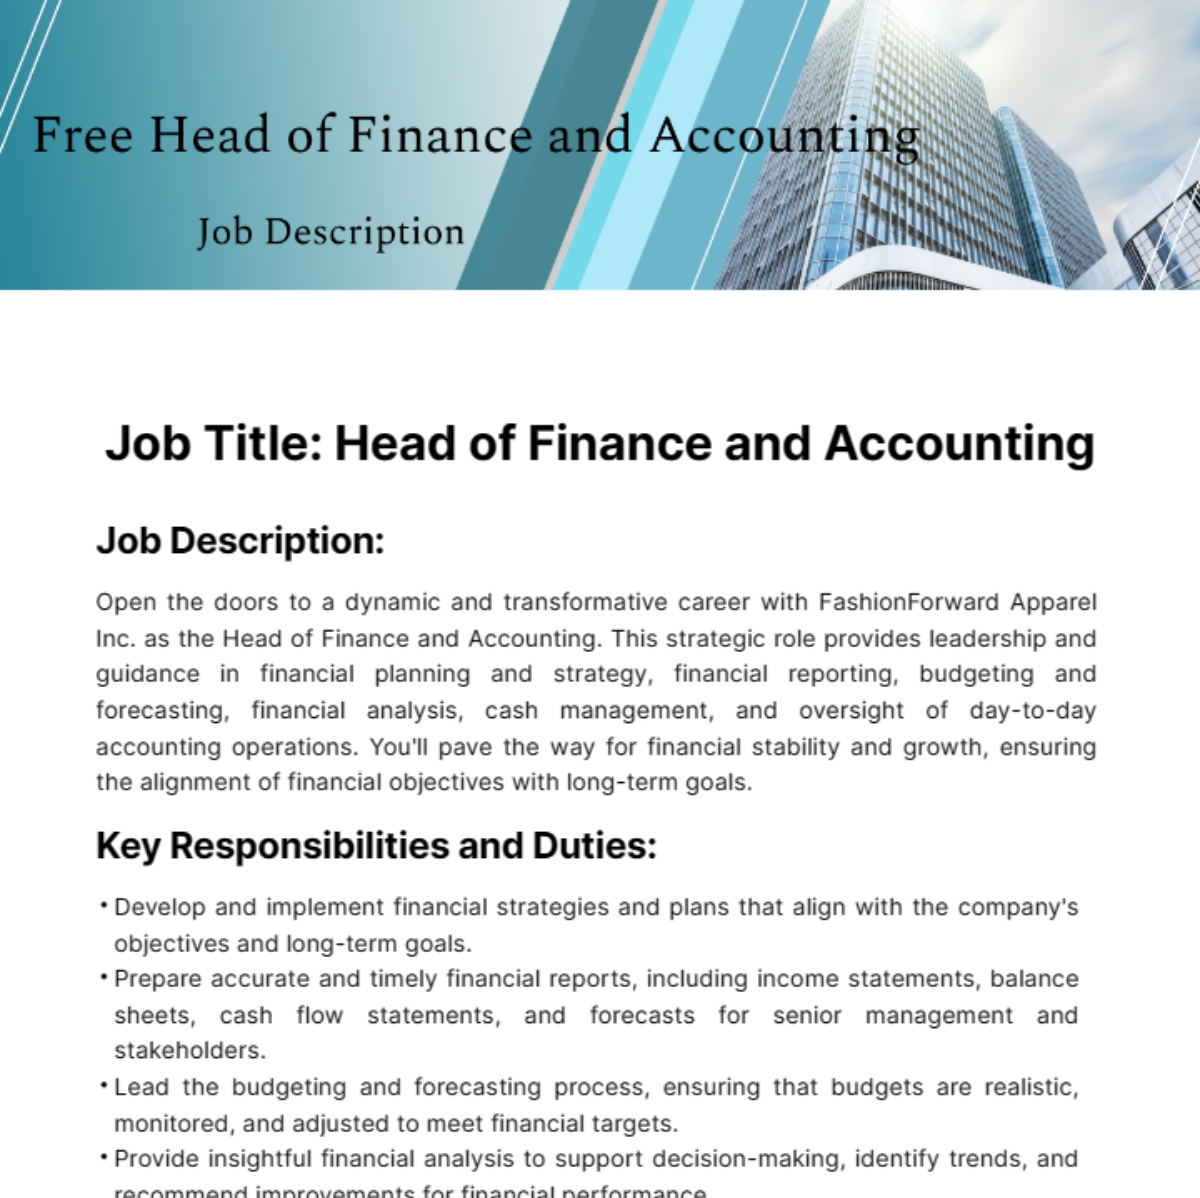 Head of Finance and Accounting Job Description Template